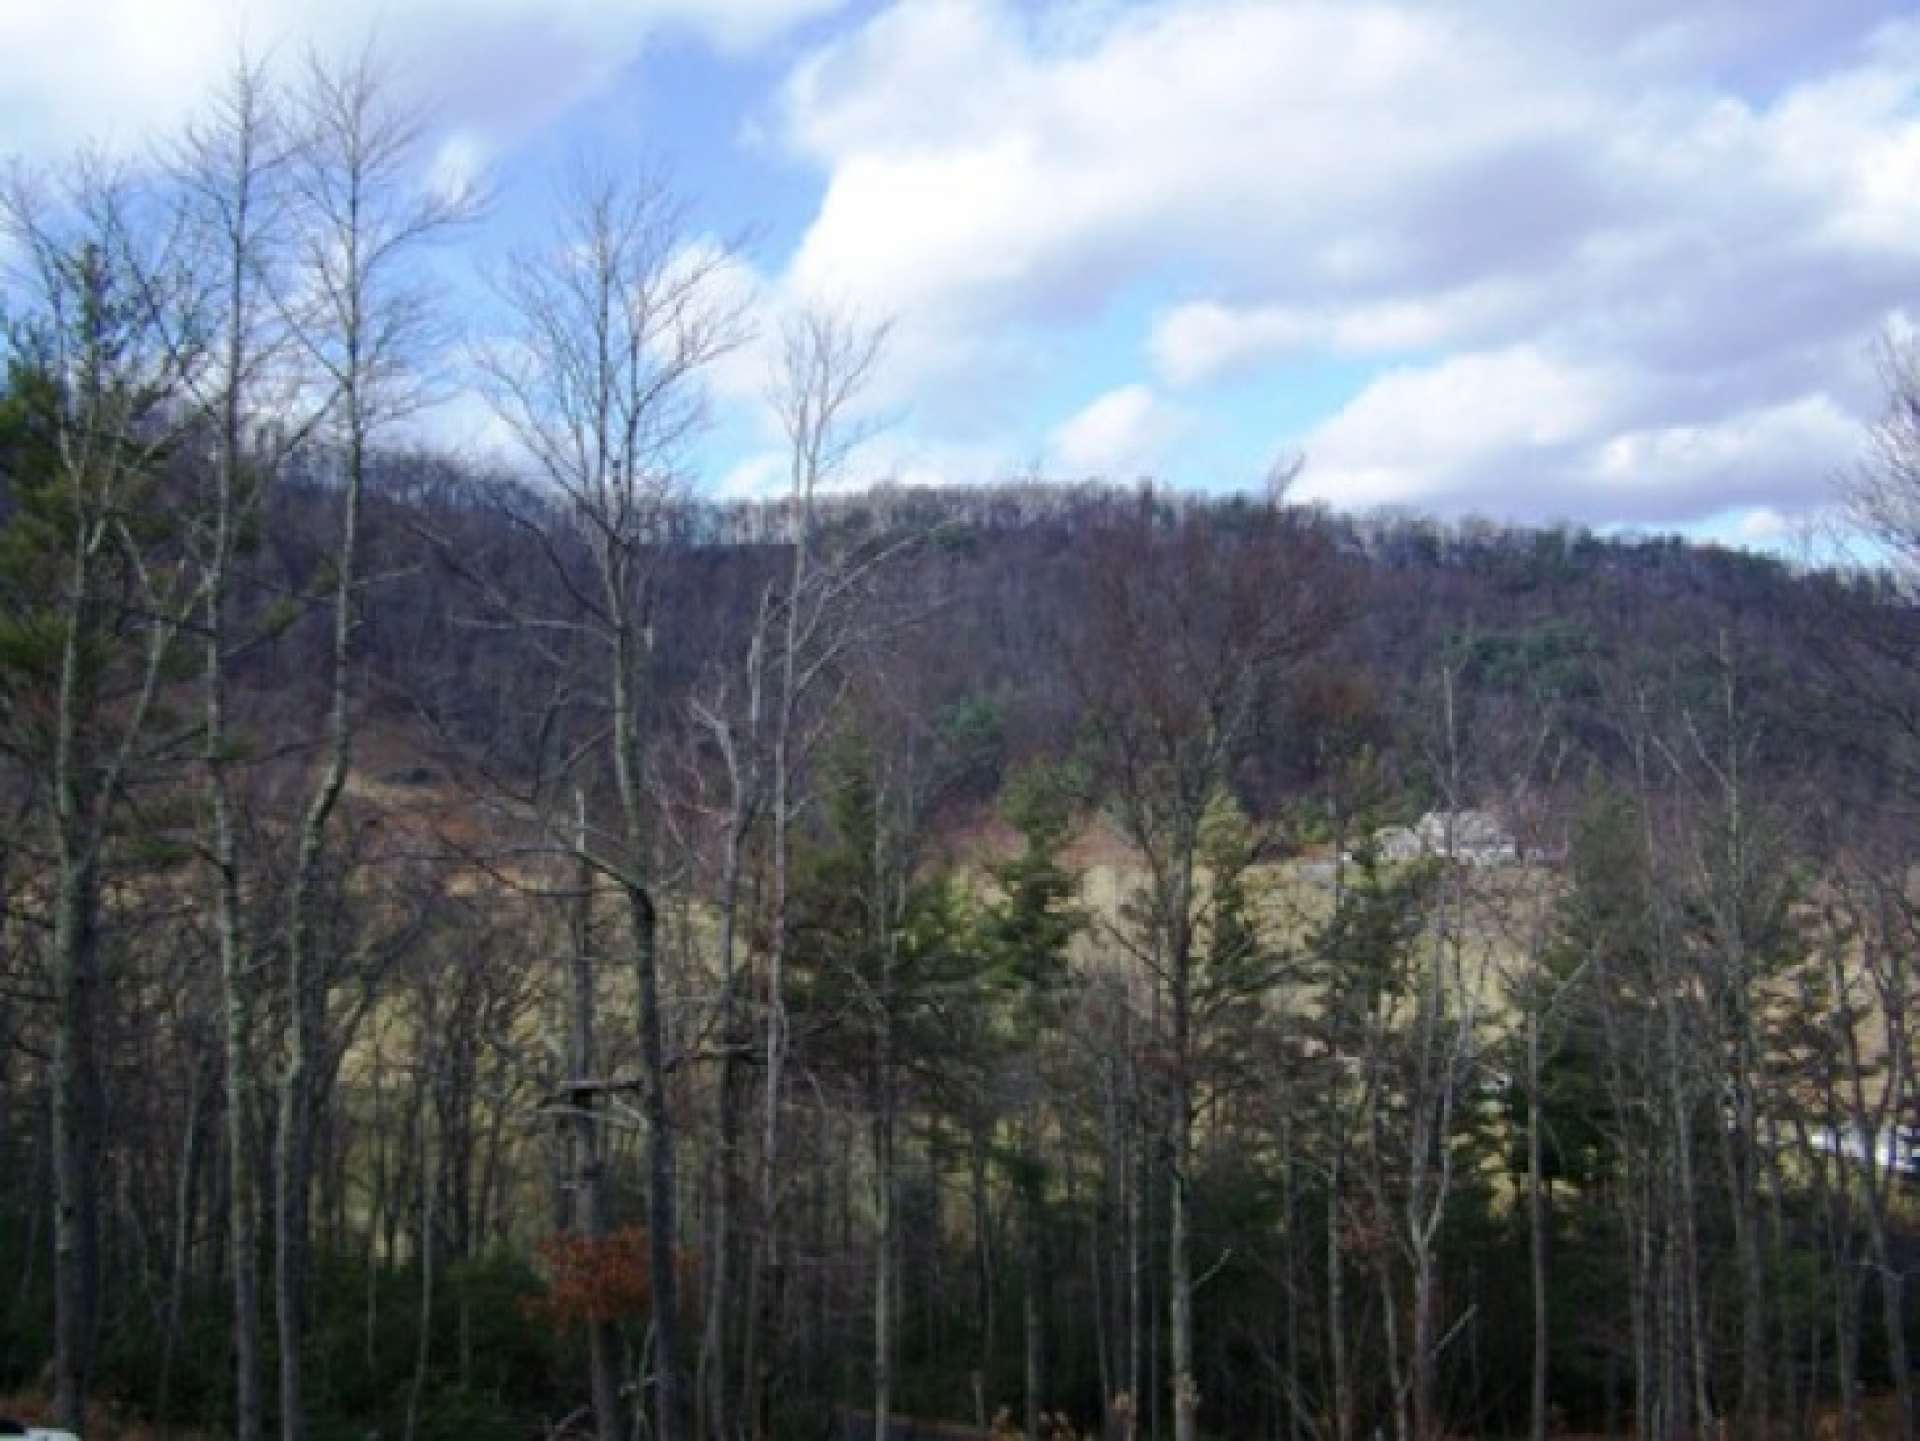 Lot 2 is a 1.01 sloping wooded homesite with seasonal mountain and pastoral views. Laurel Oaks has underground utilities and private graveled road.